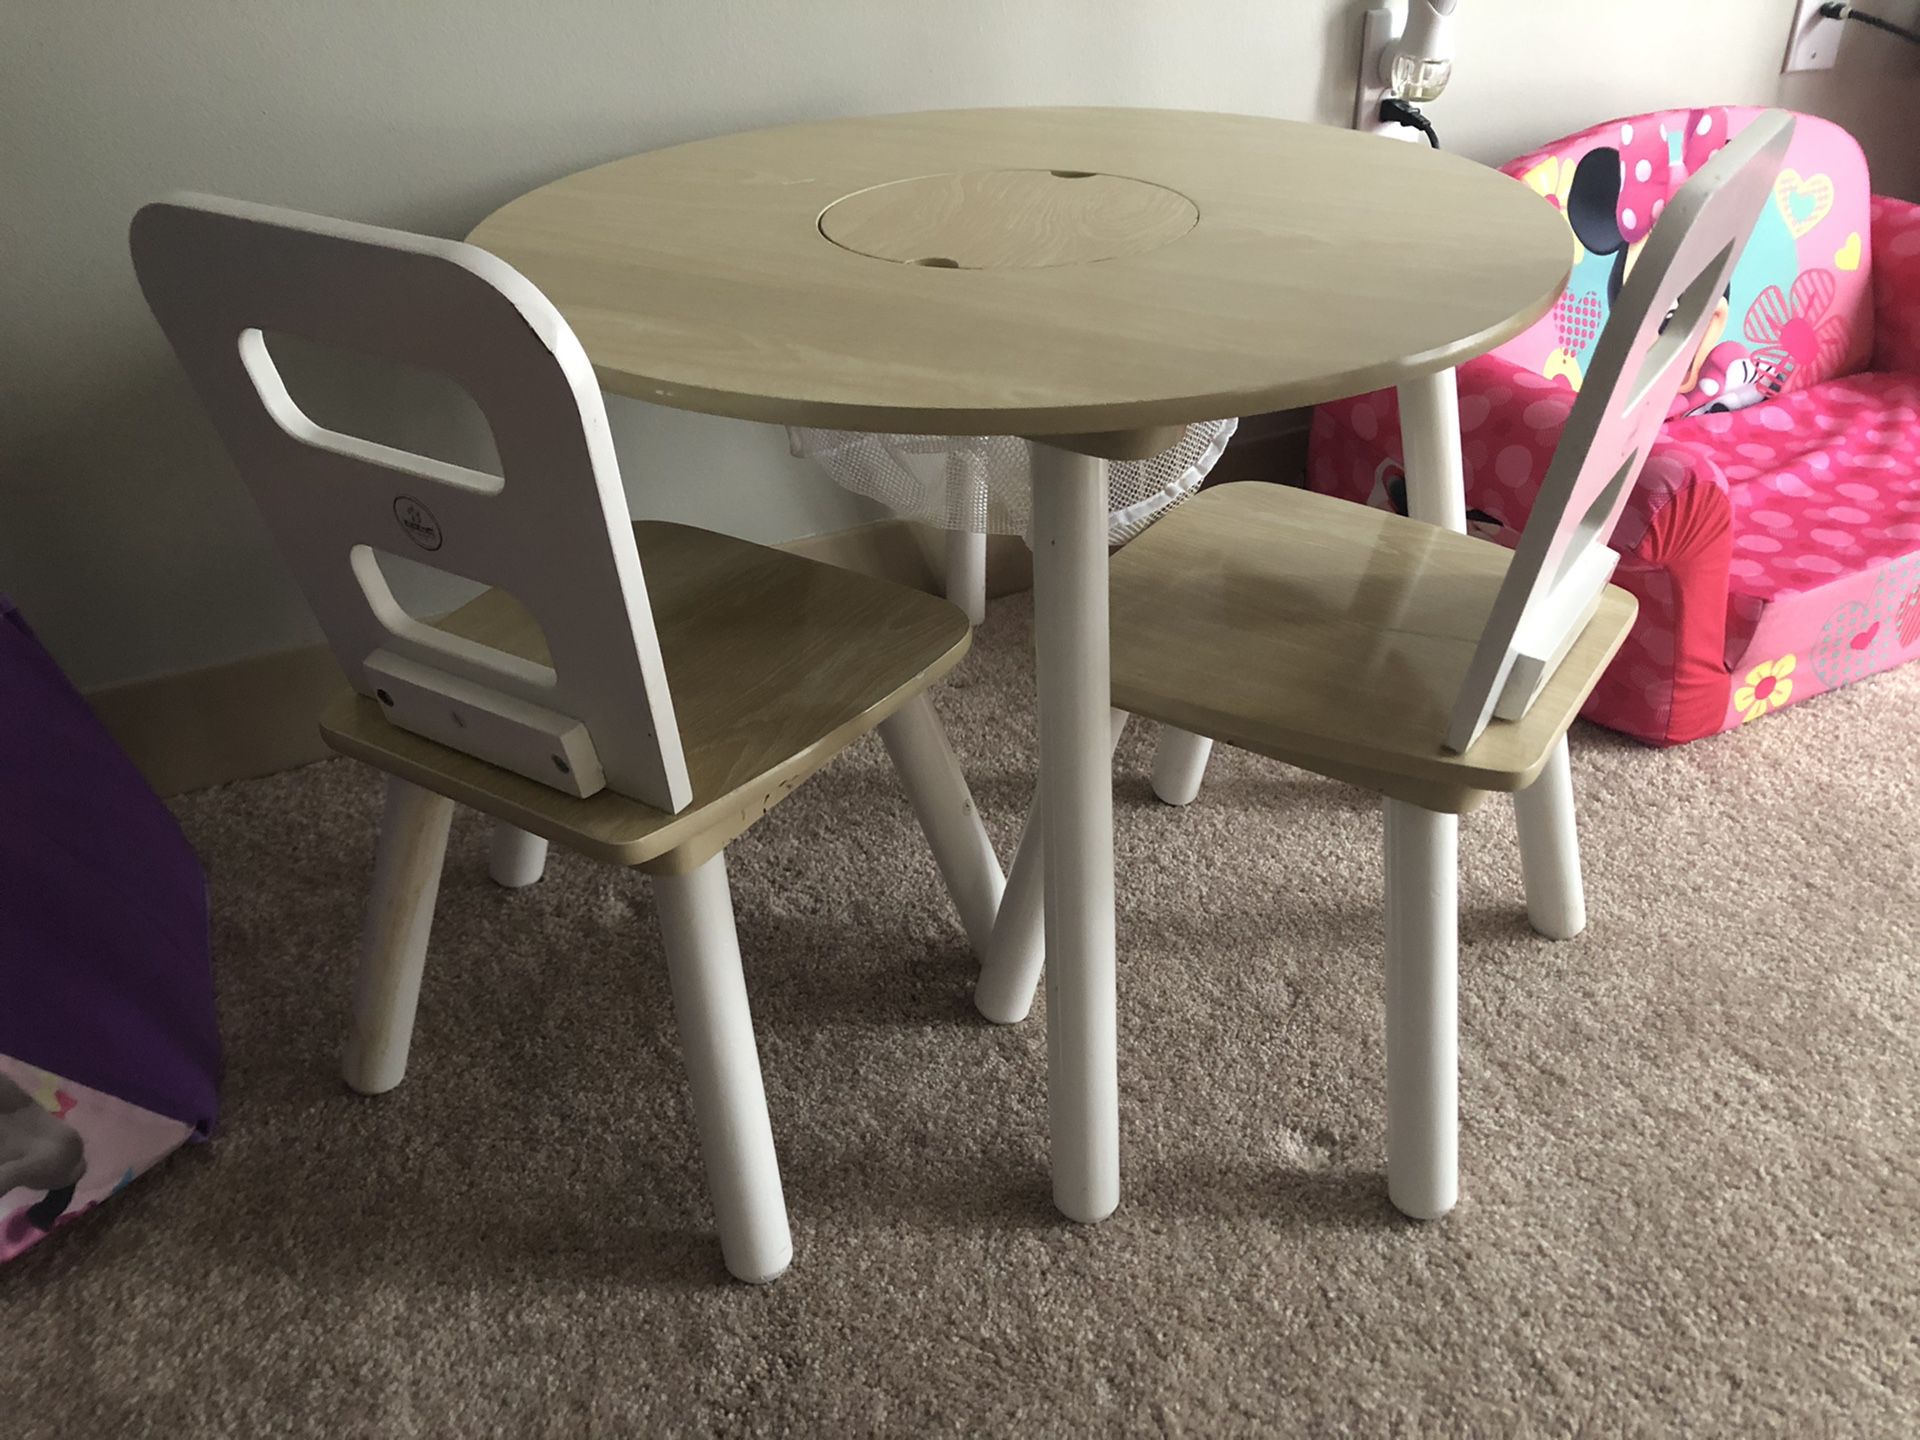 Kids table with 2 chairs